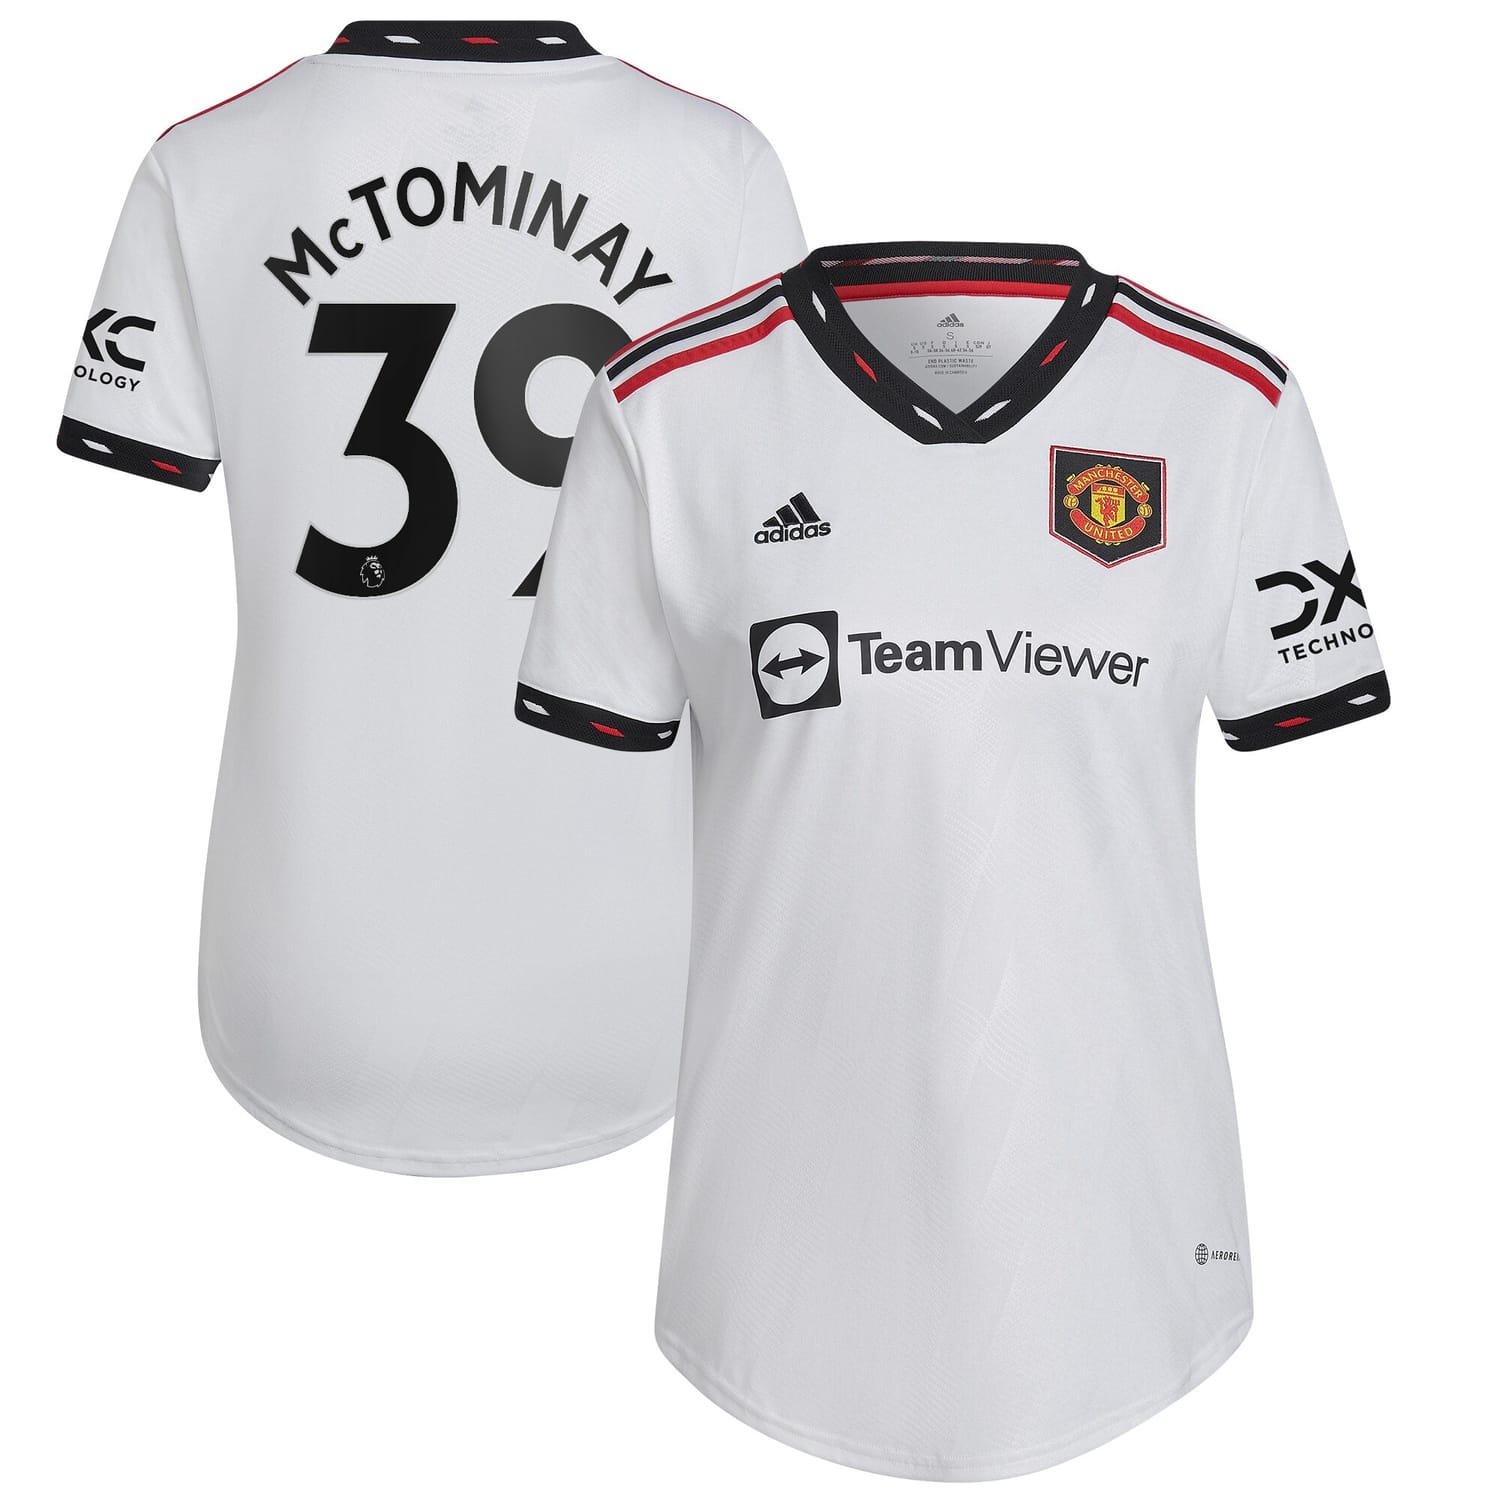 Premier League Manchester United Away Jersey Shirt White 2022-23 player Scott McTominay printing for Women